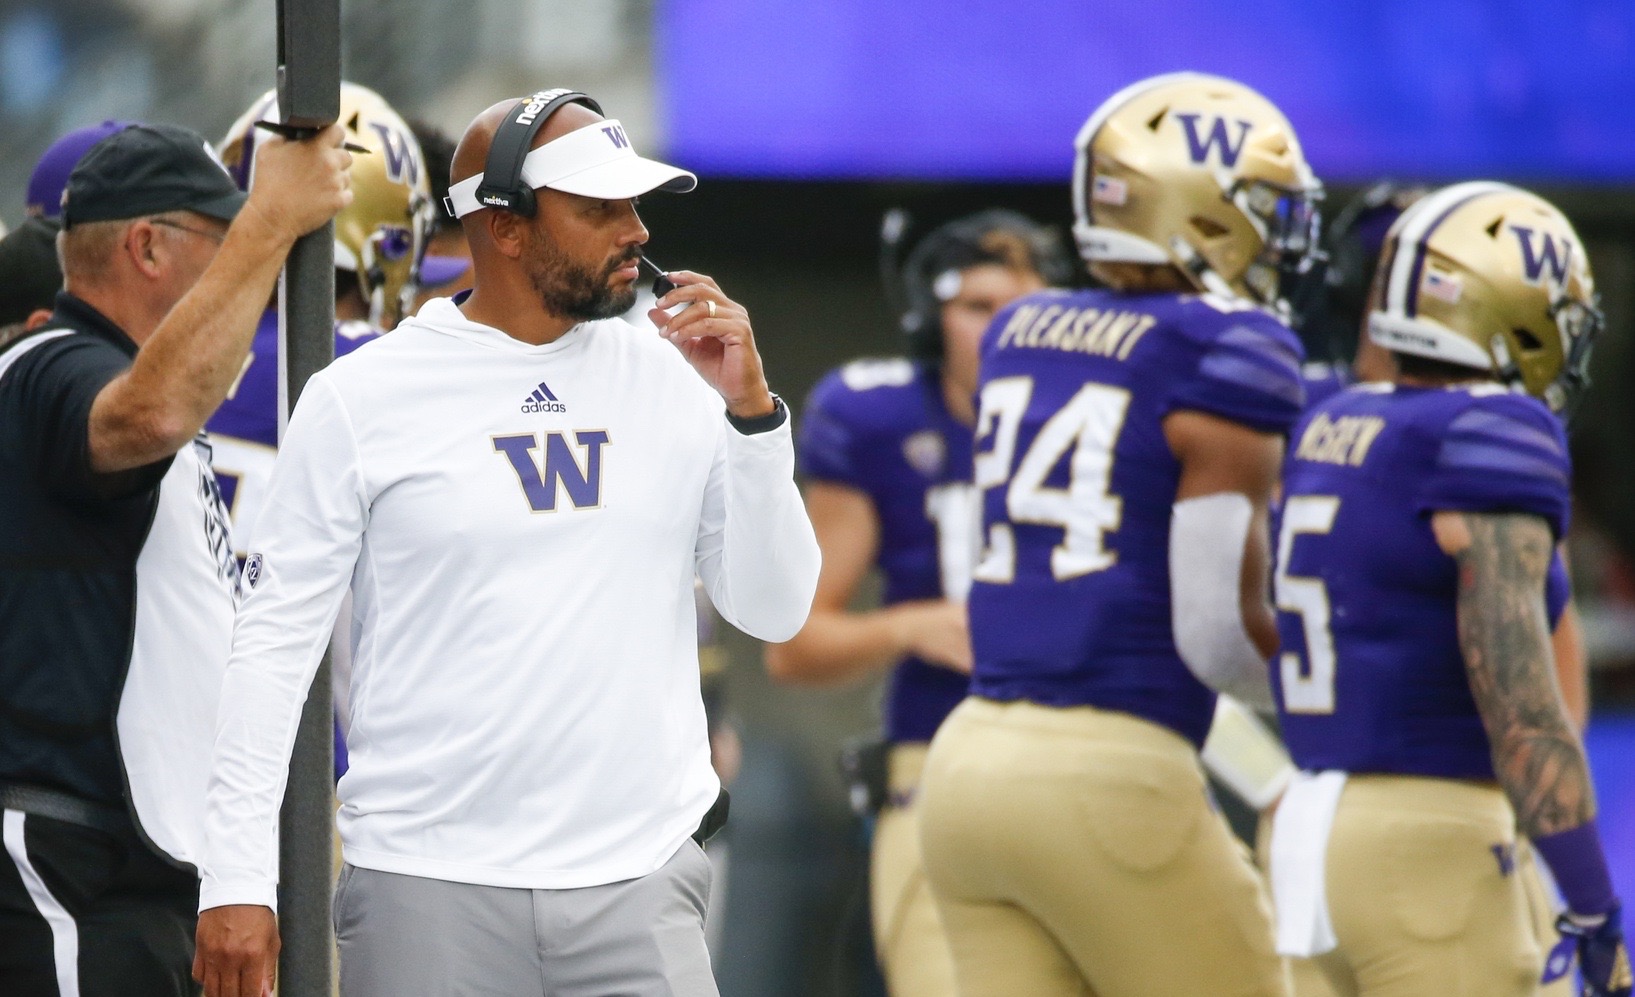 Husky Lineup Changes That Could Happen at Michigan